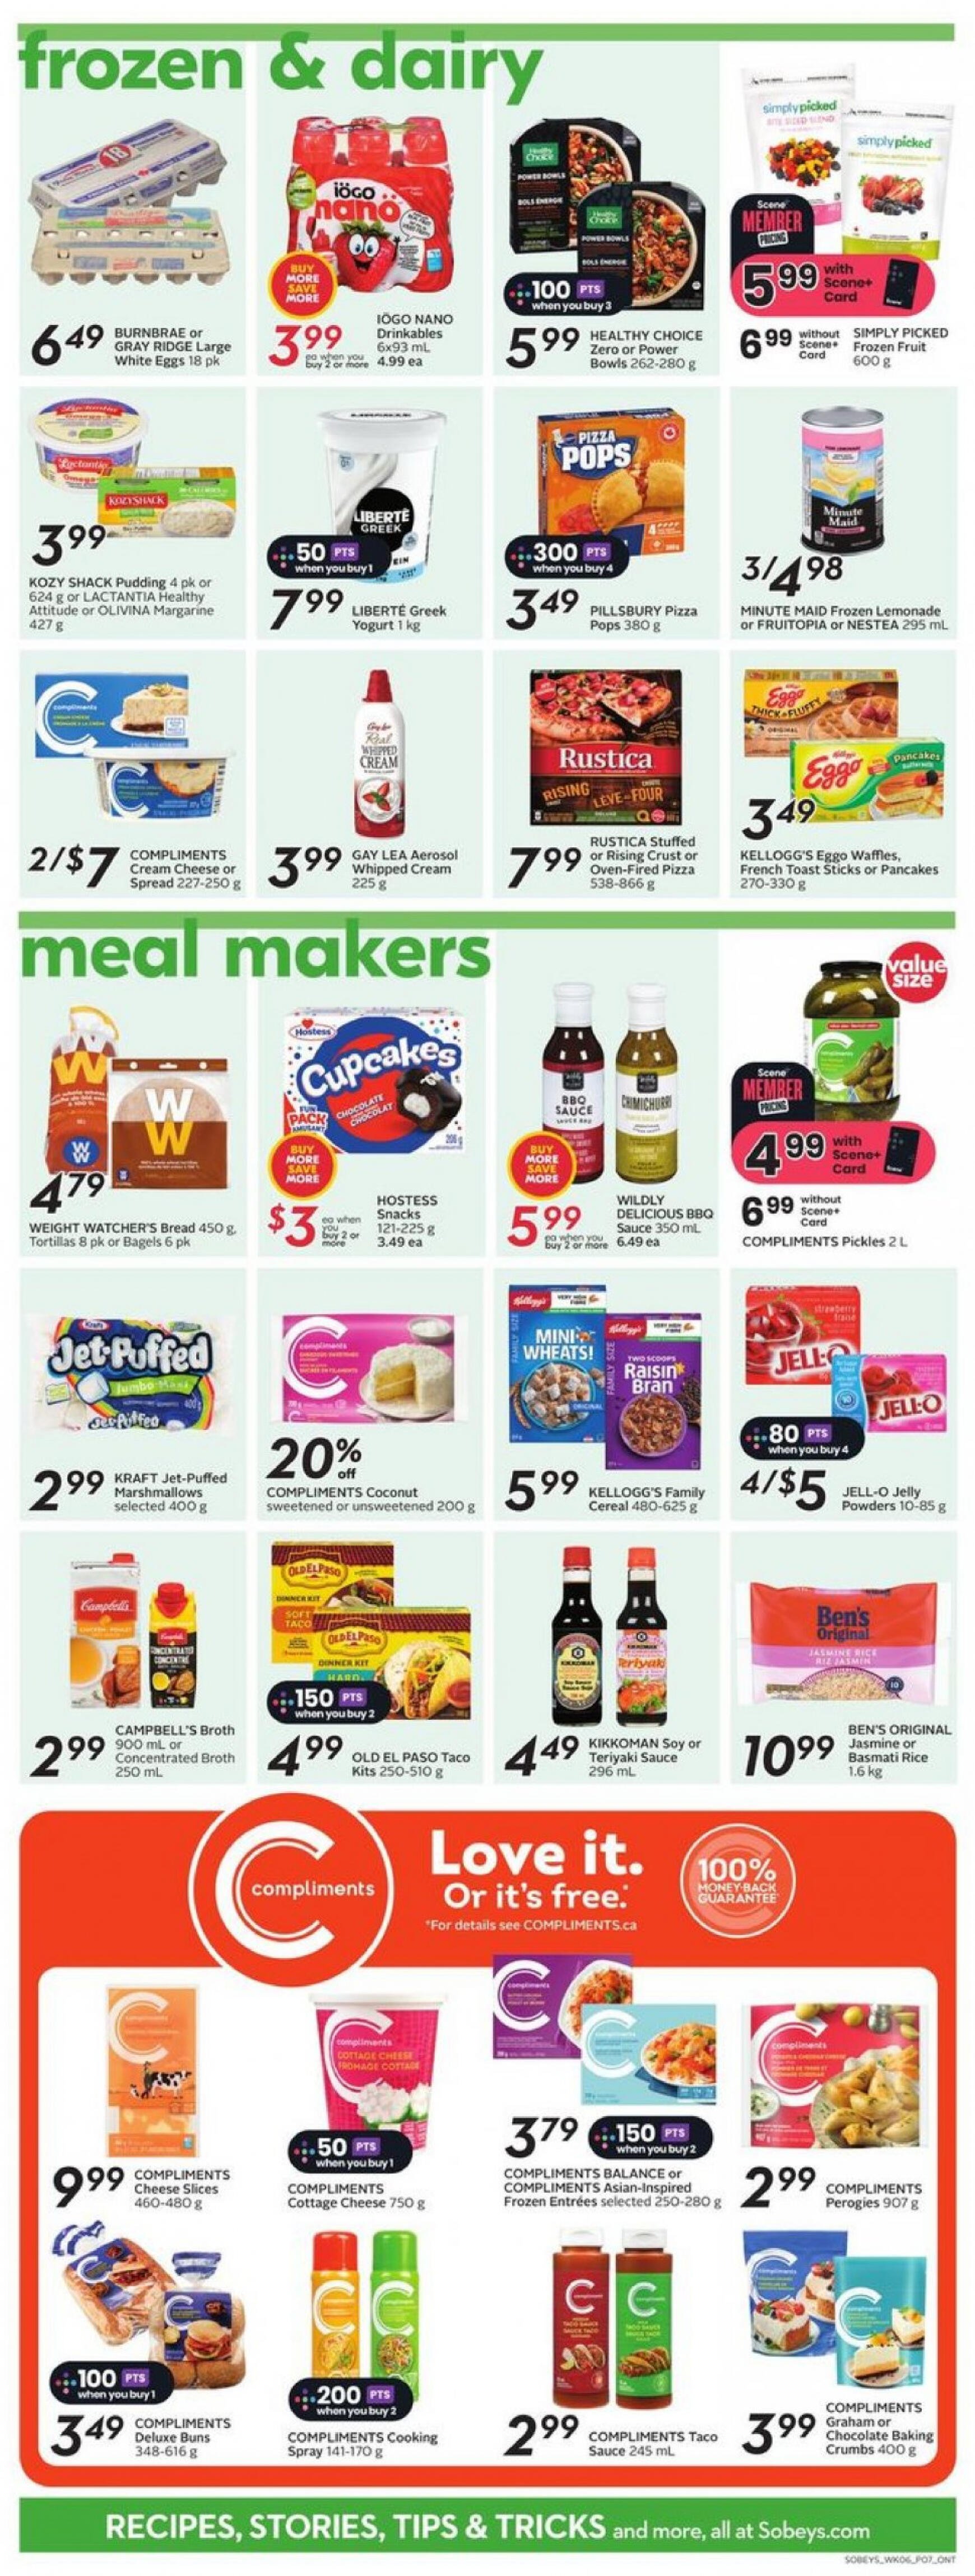 sobeys - Sobeys - Weekly Flyer - Ontario flyer current 06.06. - 12.06. - page: 14